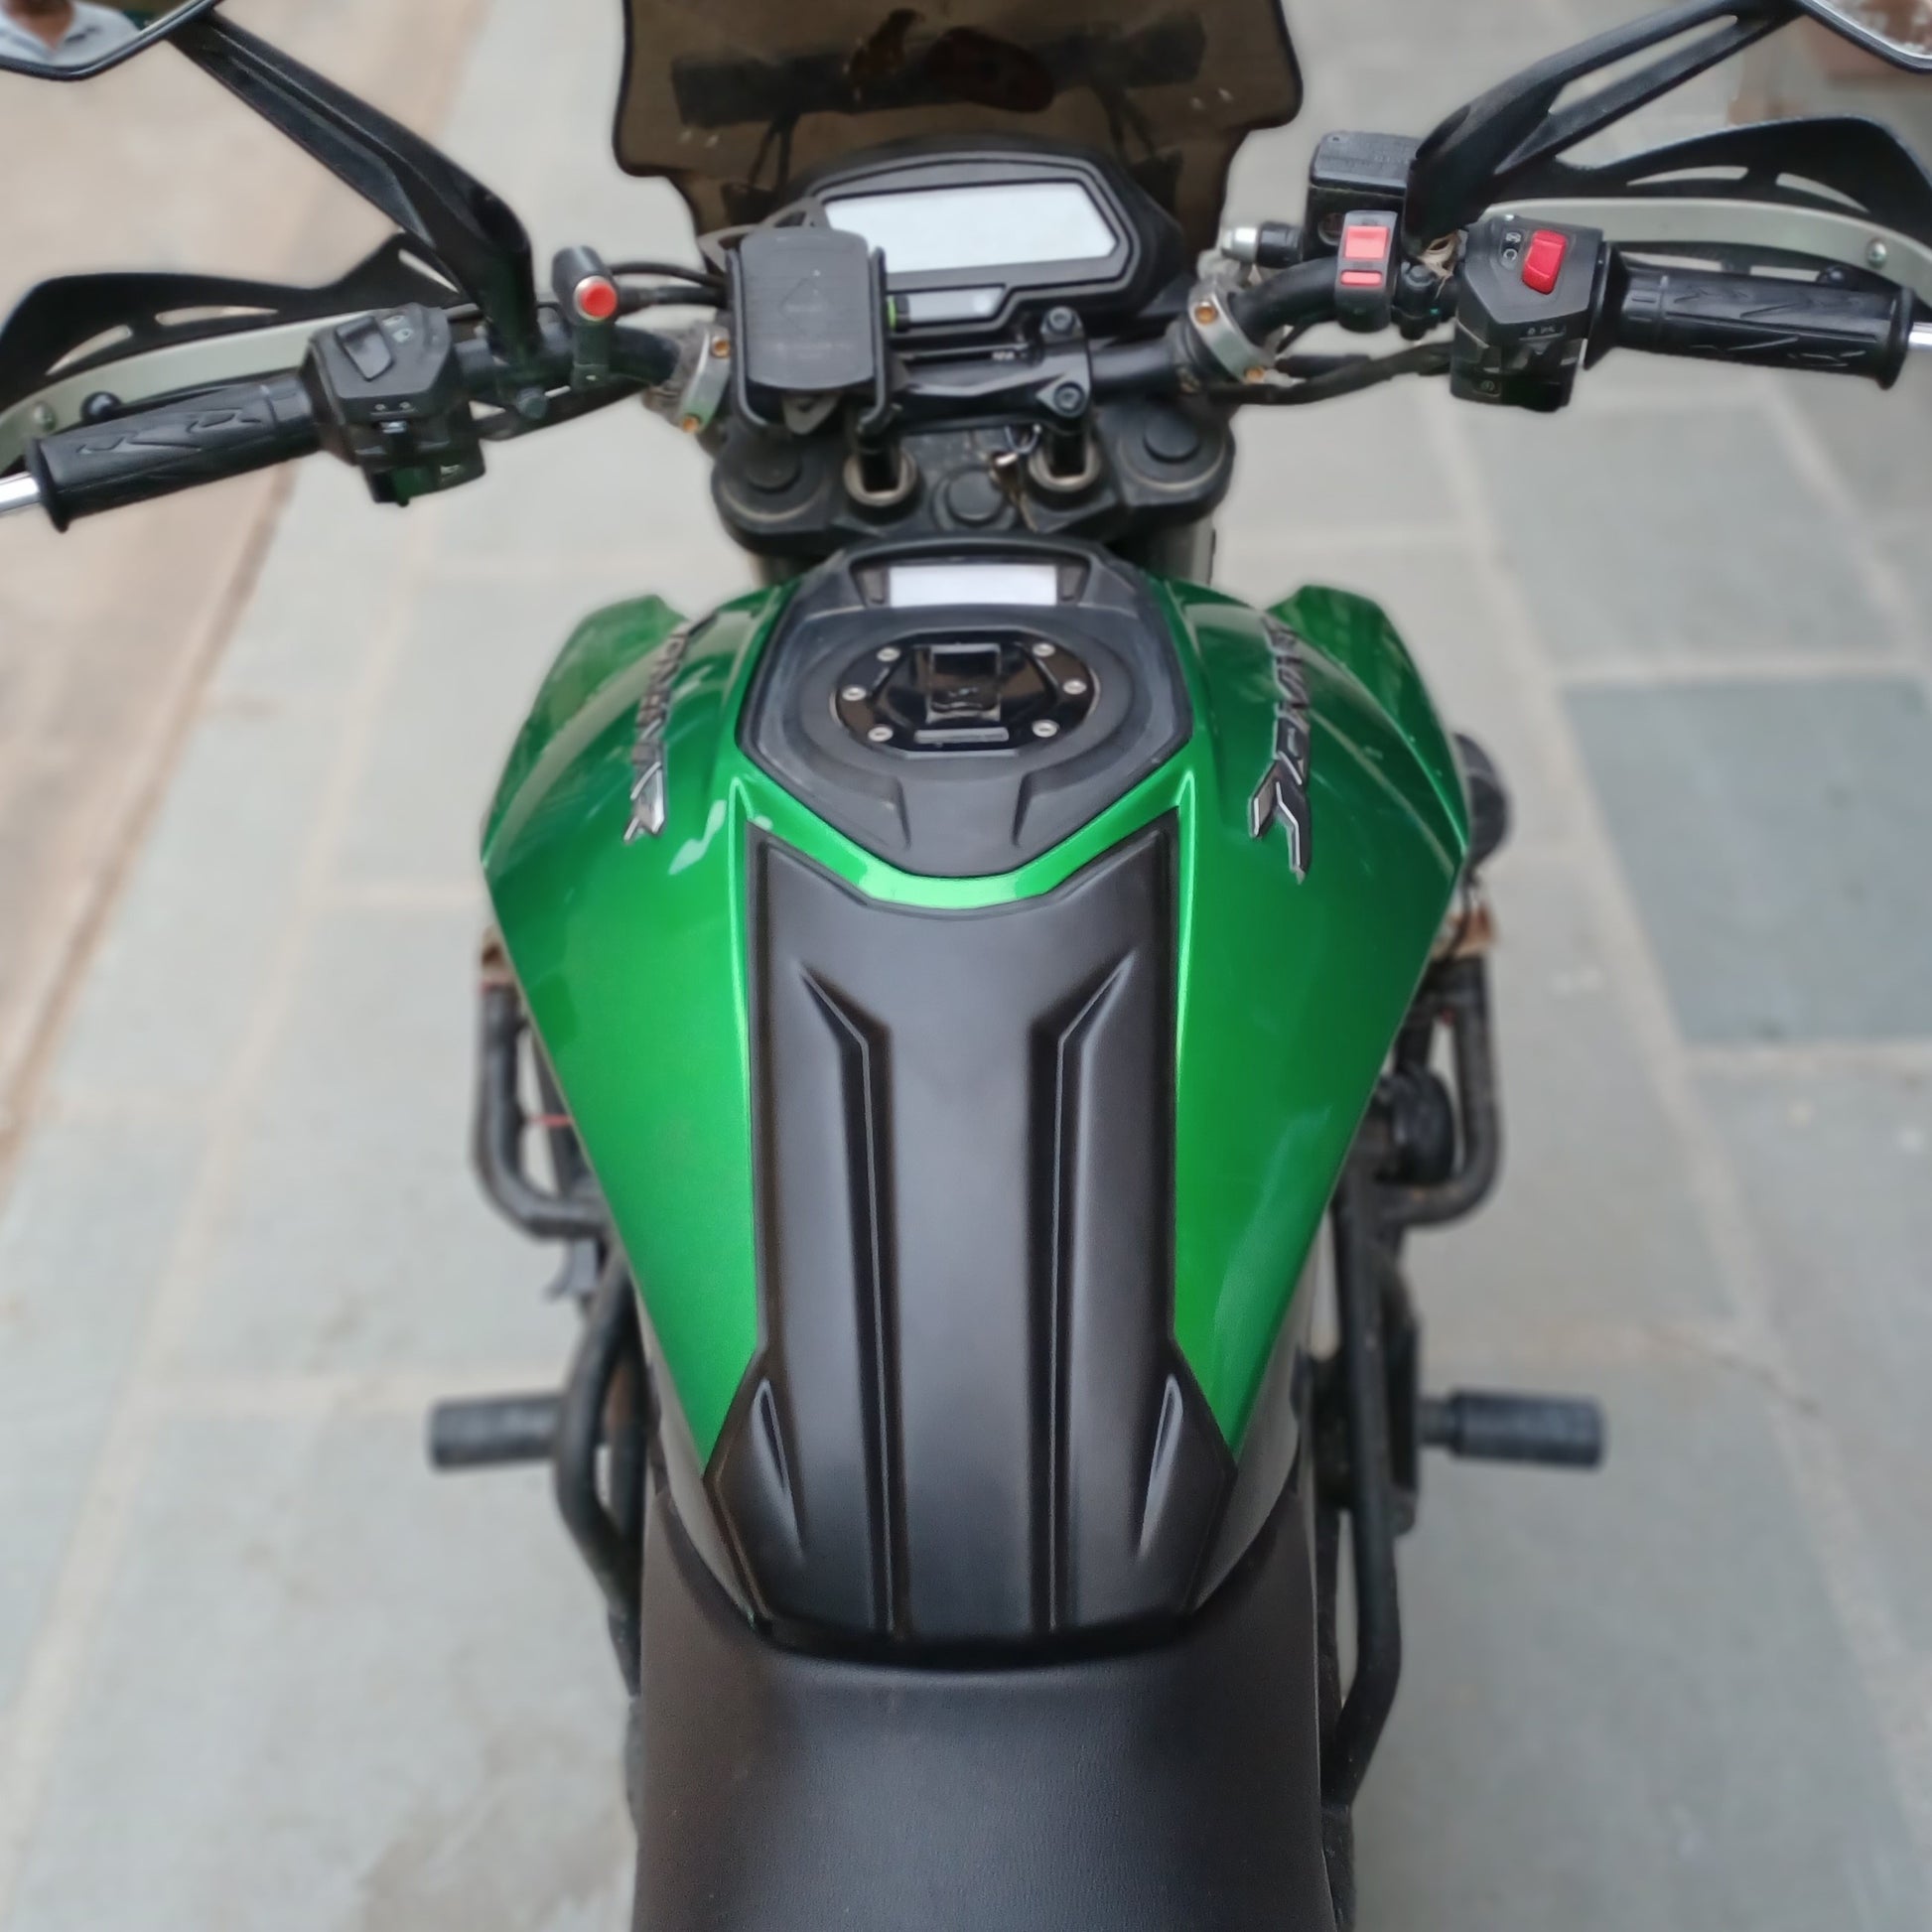 Bajaj Dominar Tank Protection | Best Tank Pad Cover | Tank Scratch Protection | Modified Looks | Fits Bajaj Dominar 250 | Dominar 400 | Saiga Parts Modification Accessories